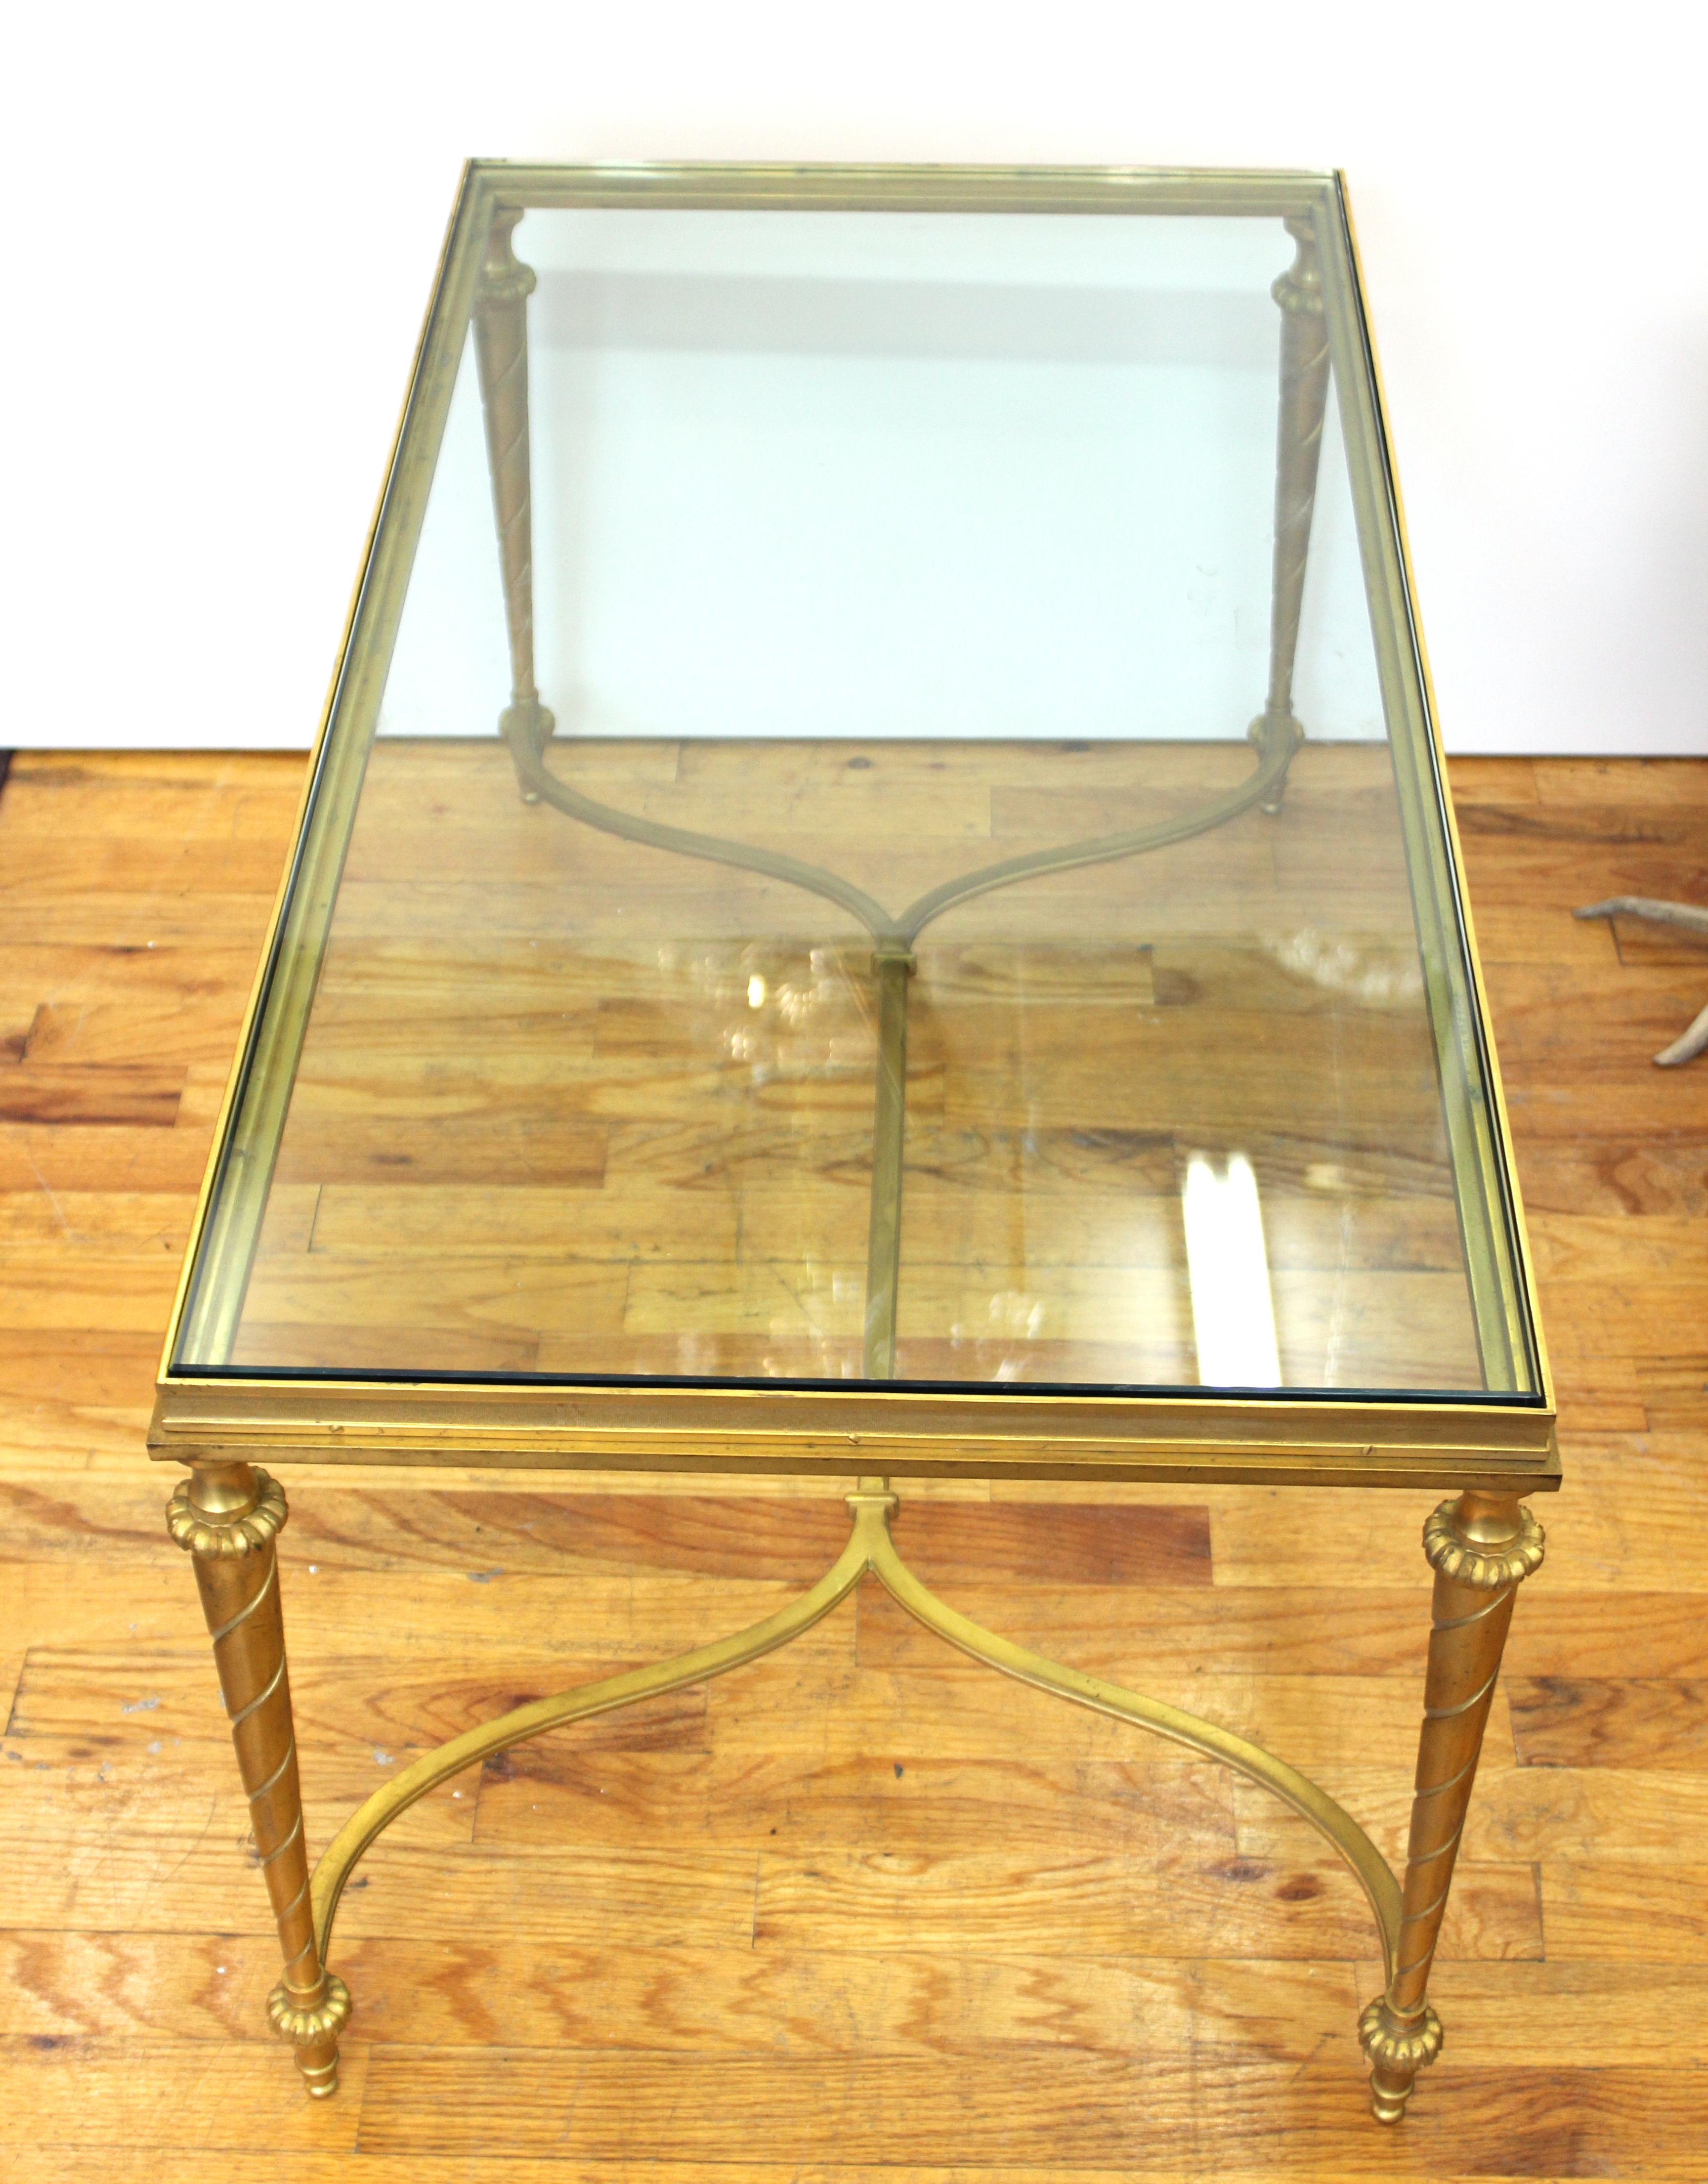 20th Century Hollywood Regency Gilt Metal Coffee Table with Glass Top